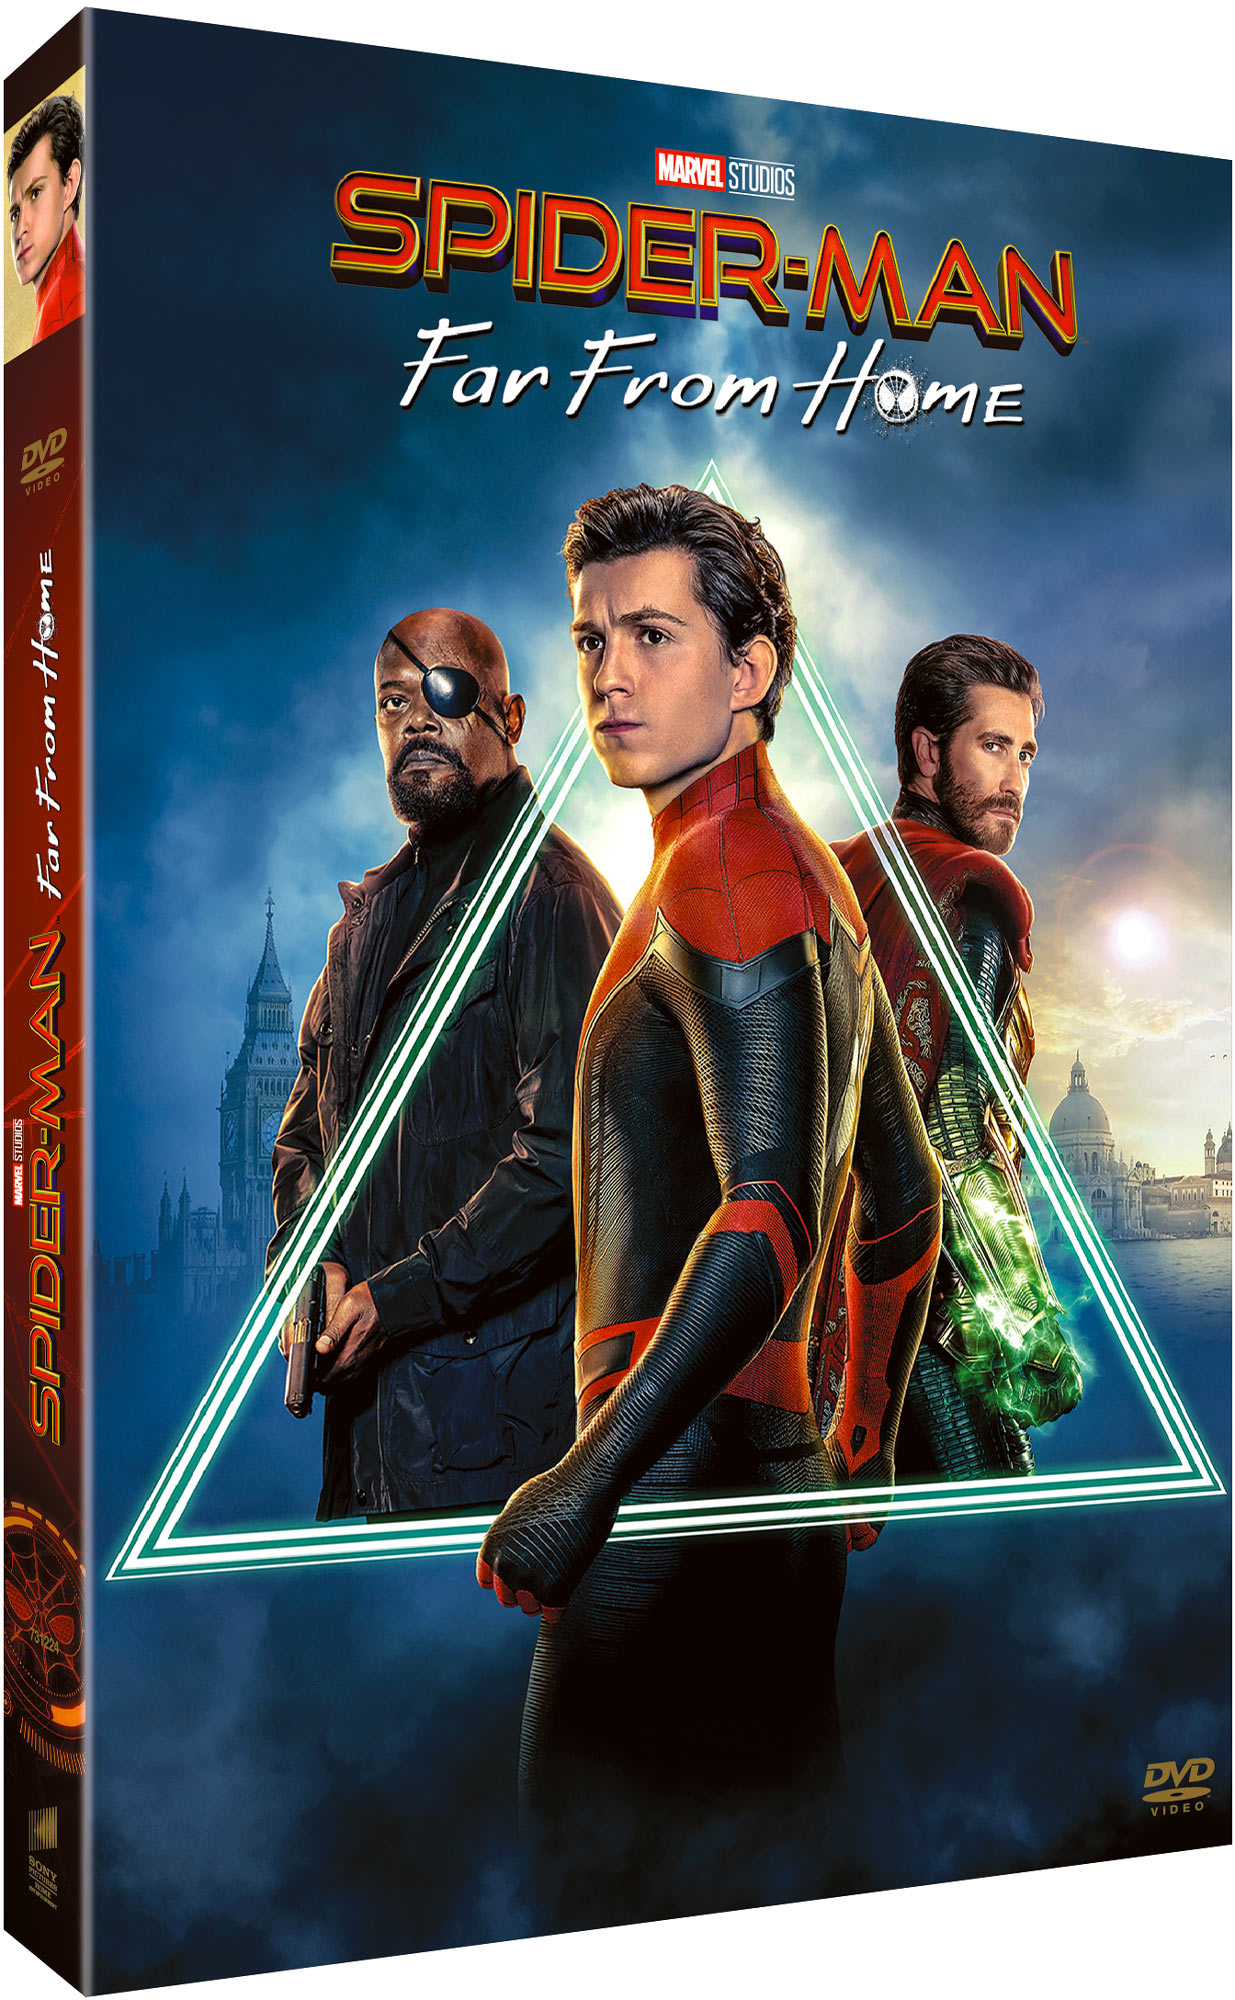 SPIDER-MAN : FAR FROM HOME - DVD